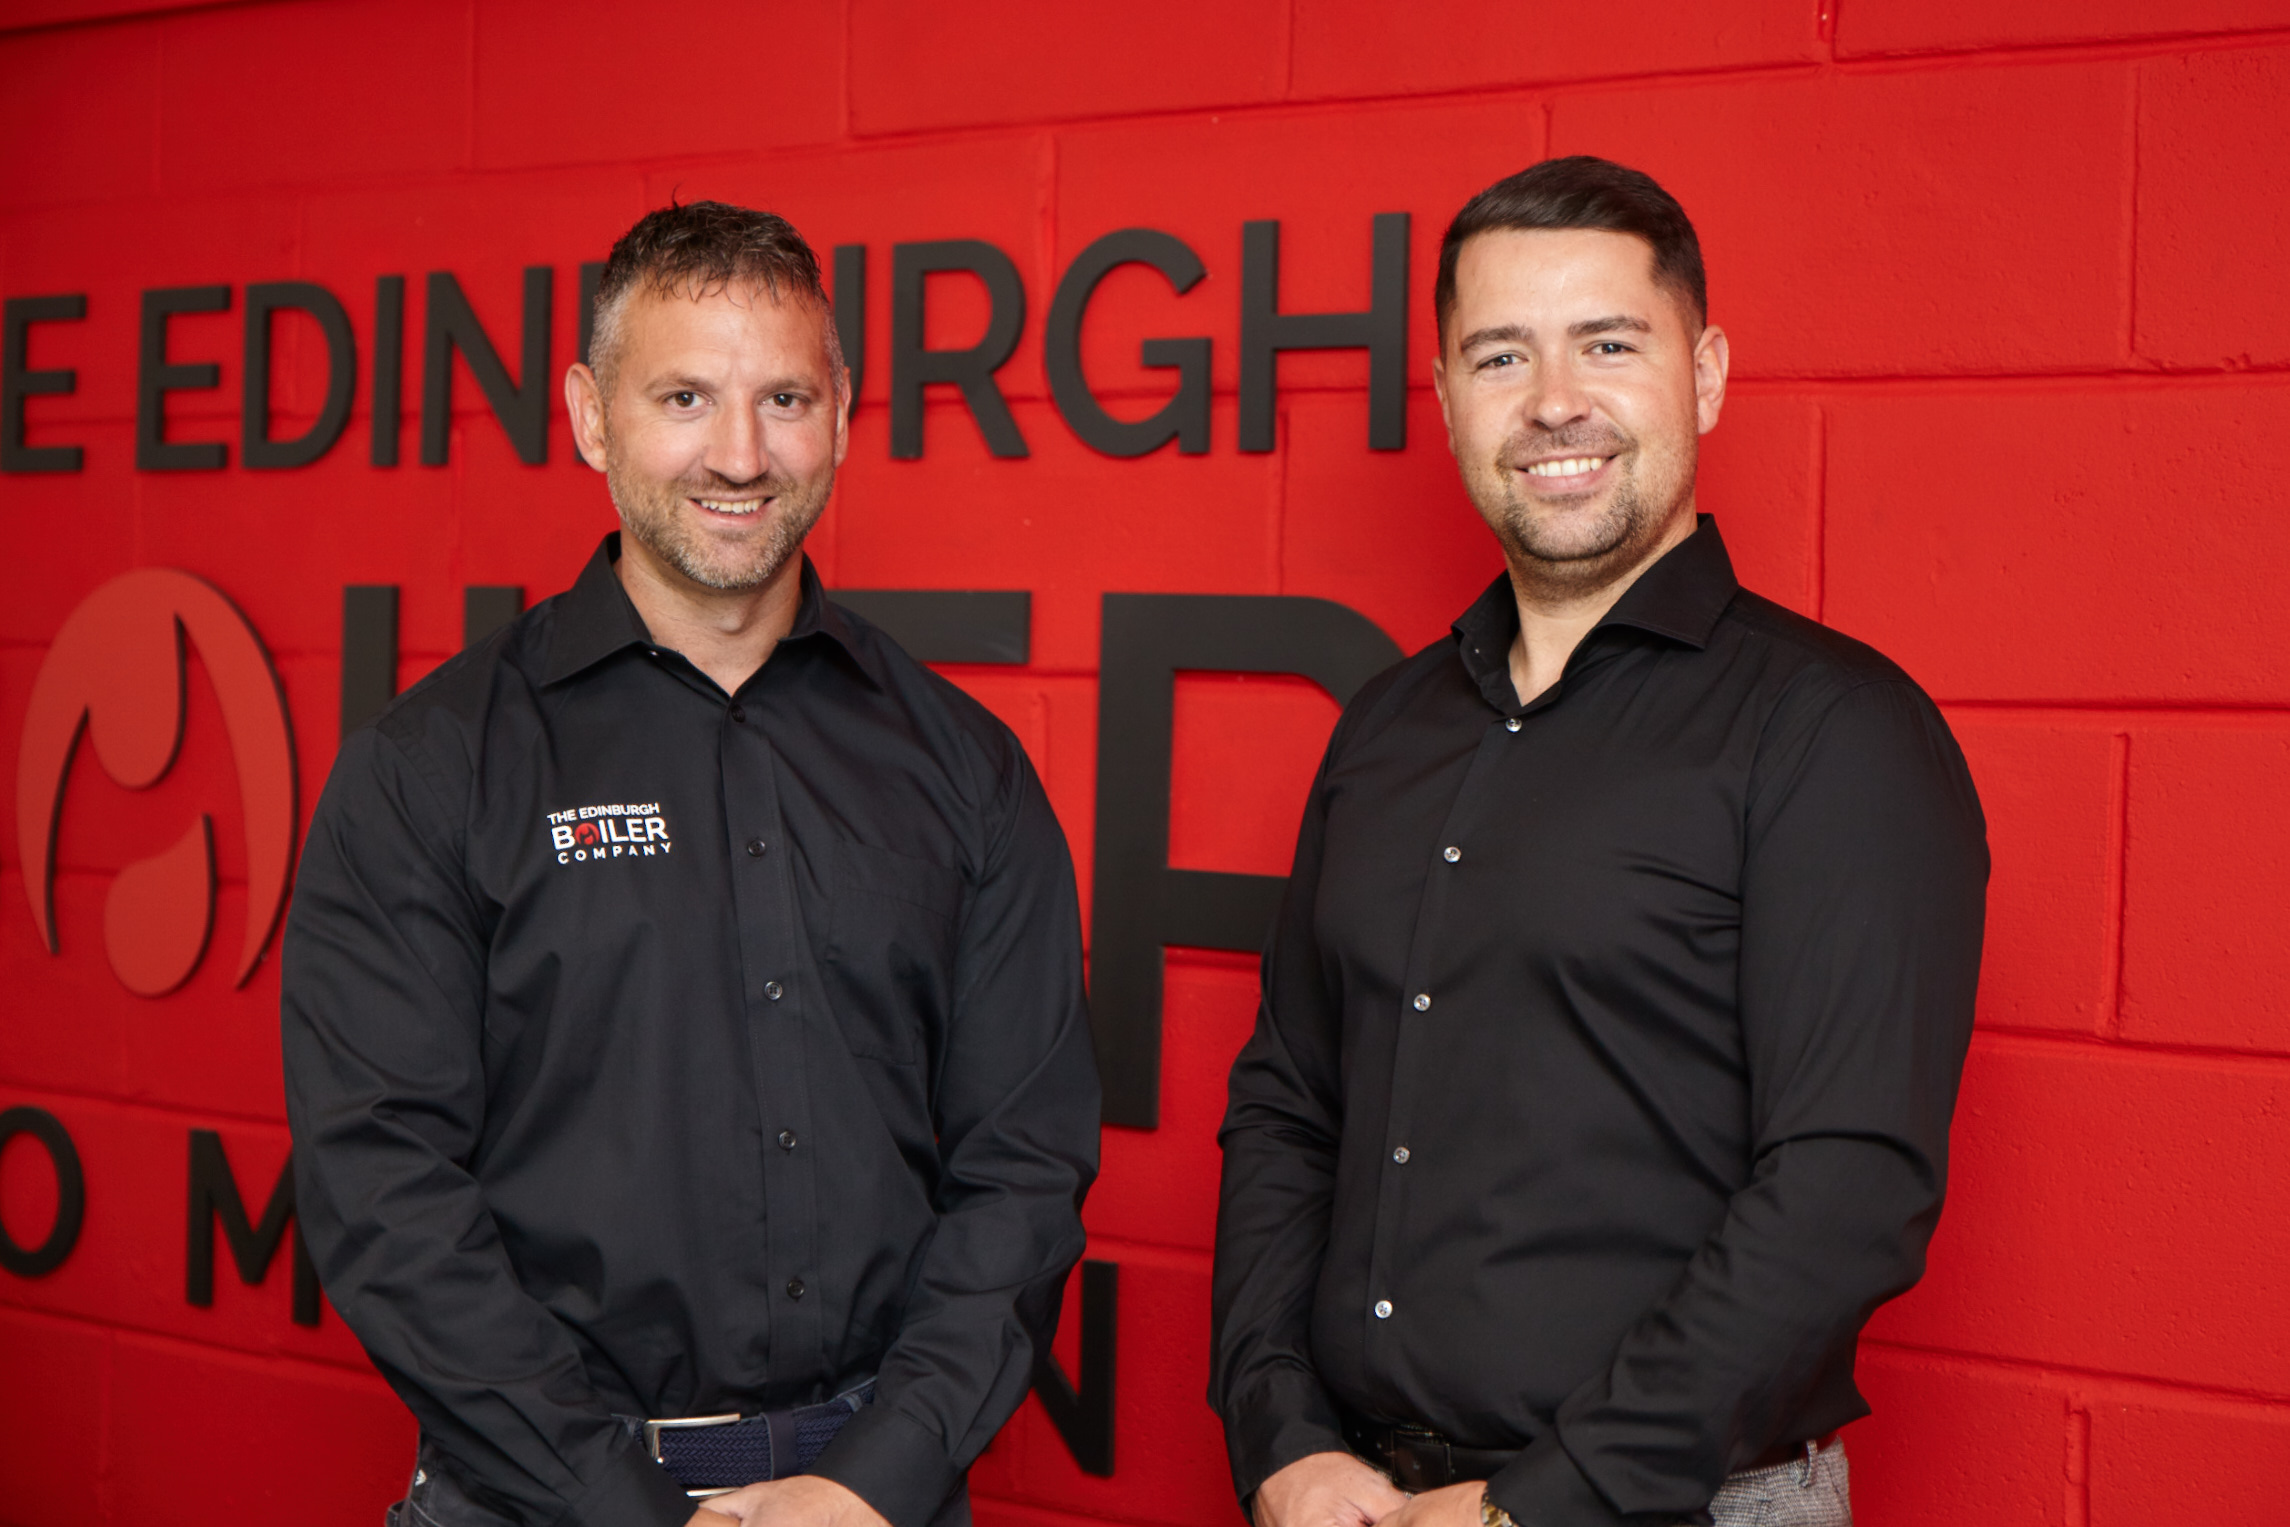 Edinburgh Boiler Company appoints first operations director